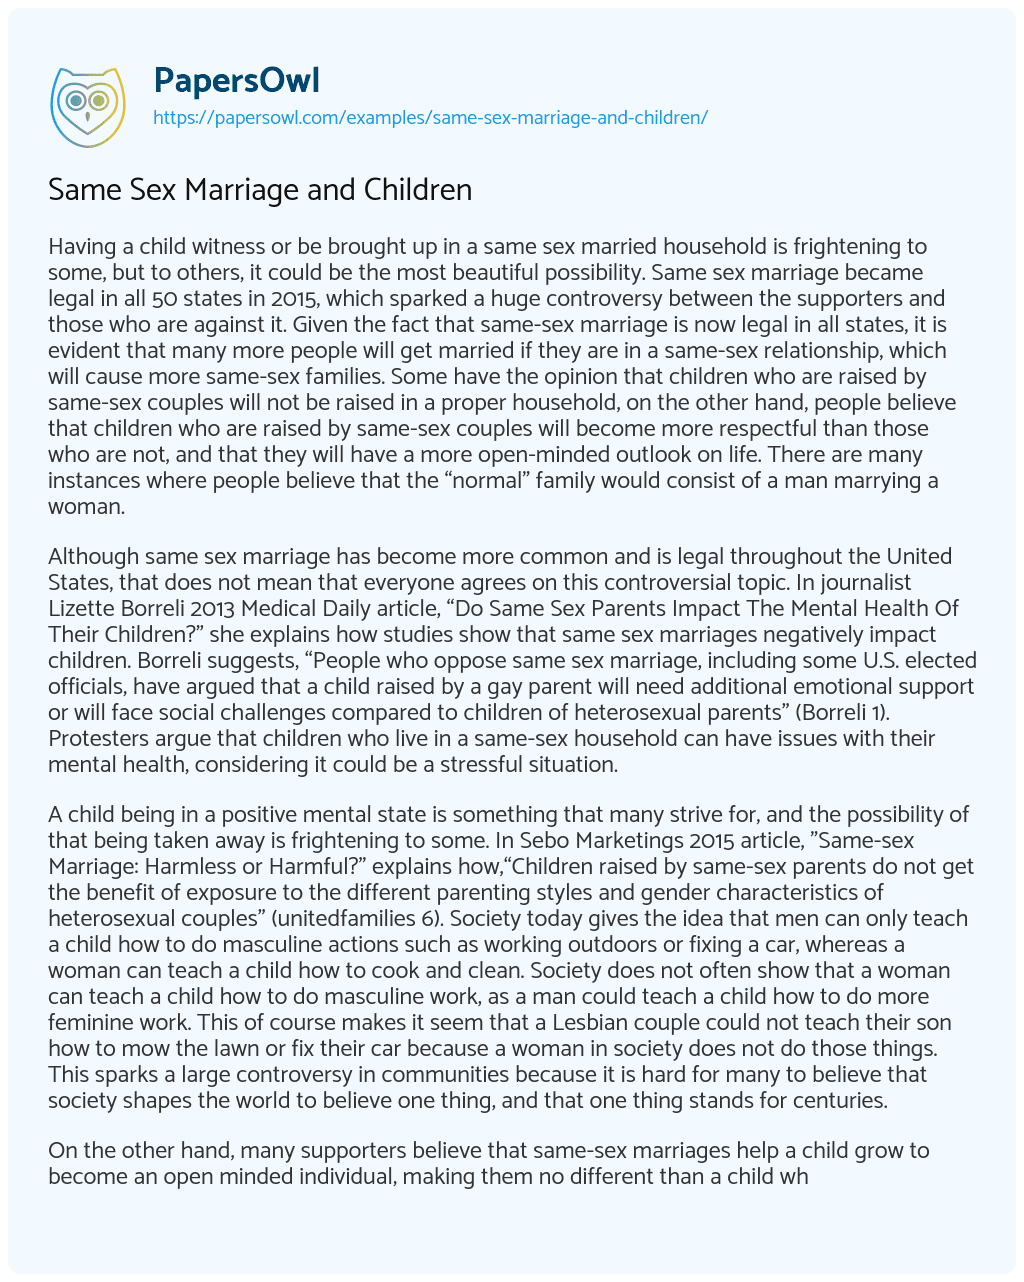 Essay on Same Sex Marriage and Children